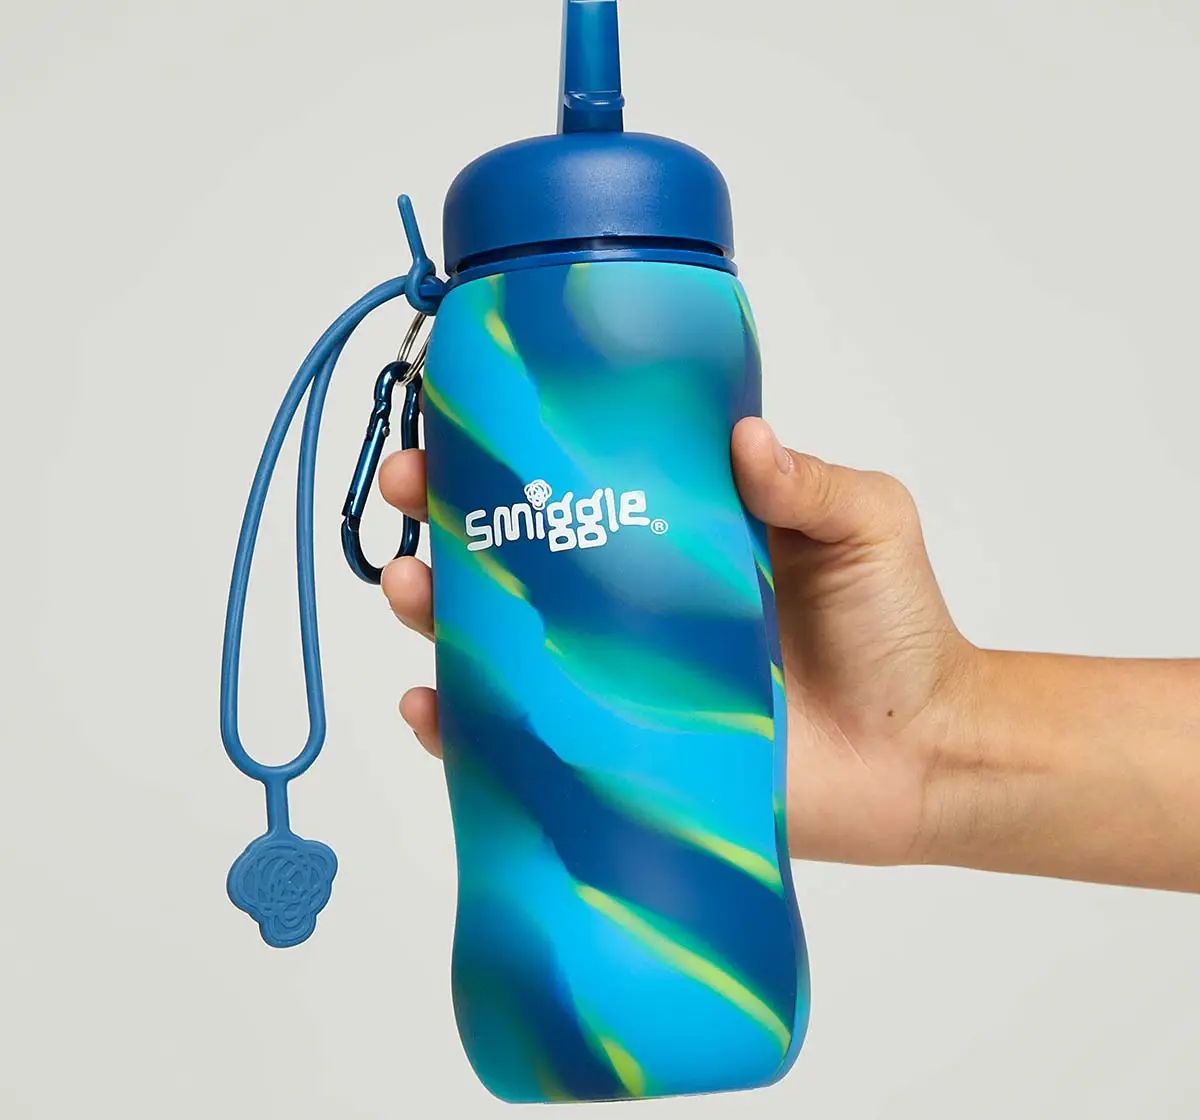 Smiggle Mirage Collection Bottles Silicon Mid Blue, 4Y+